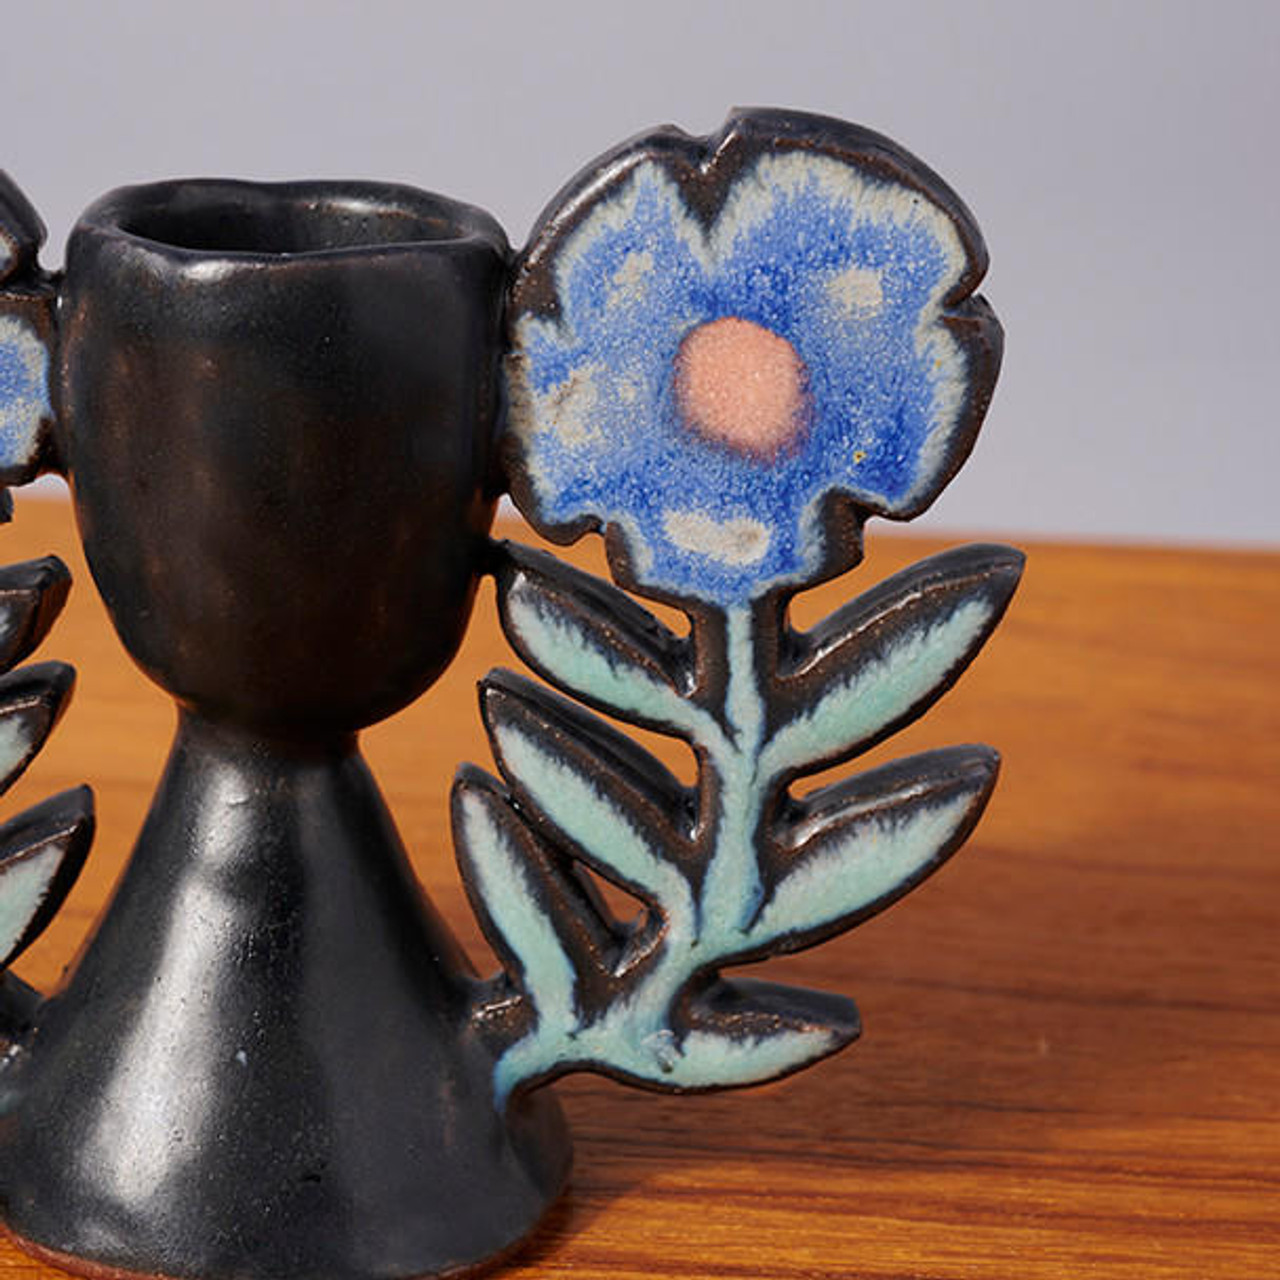 https://cdn11.bigcommerce.com/s-3rl2qg0z2p/images/stencil/1280x1280/products/13226/38593/ruth-easterbrook-floral-candleholder-by-ruth-easterbrook__68172.1675472644.jpg?c=1?imbypass=on